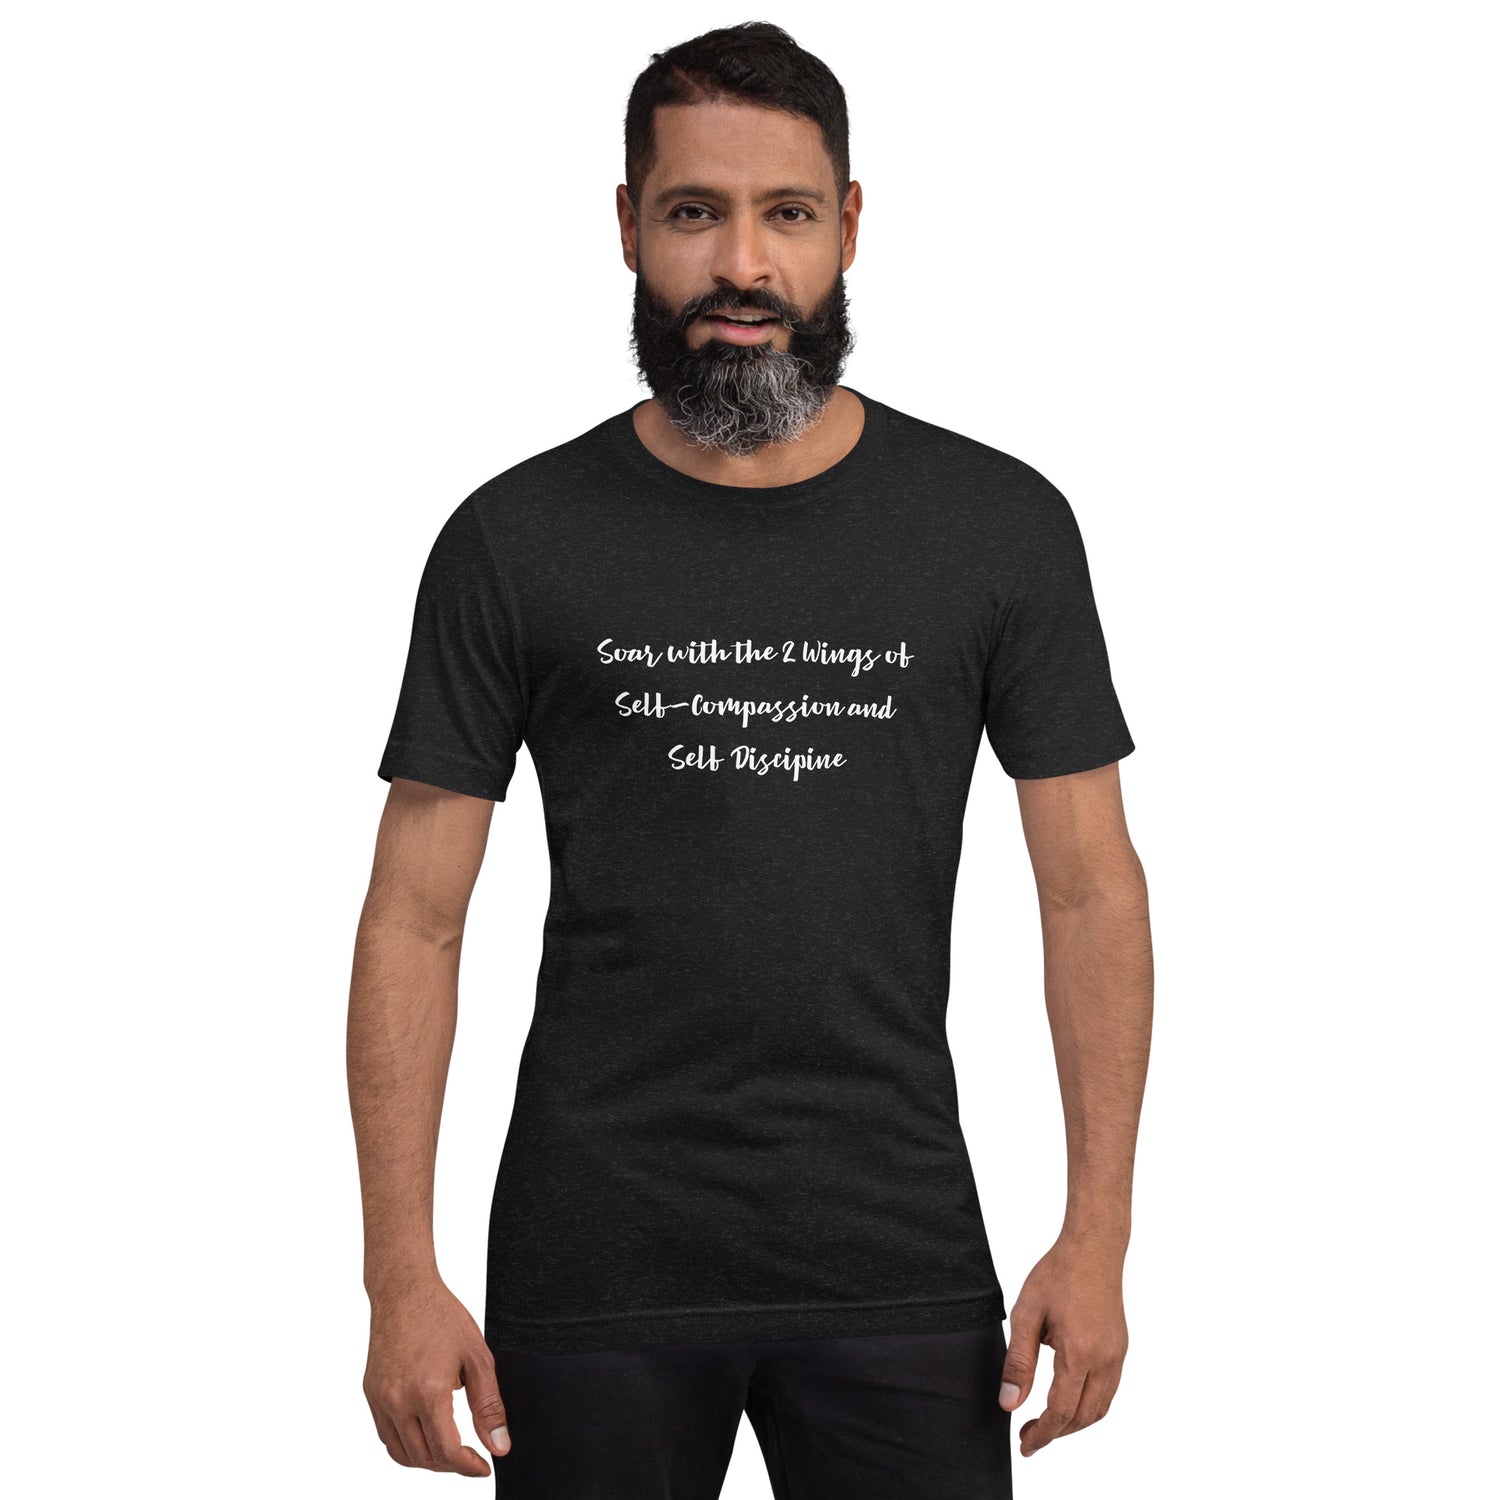 T-shirts with Slogans